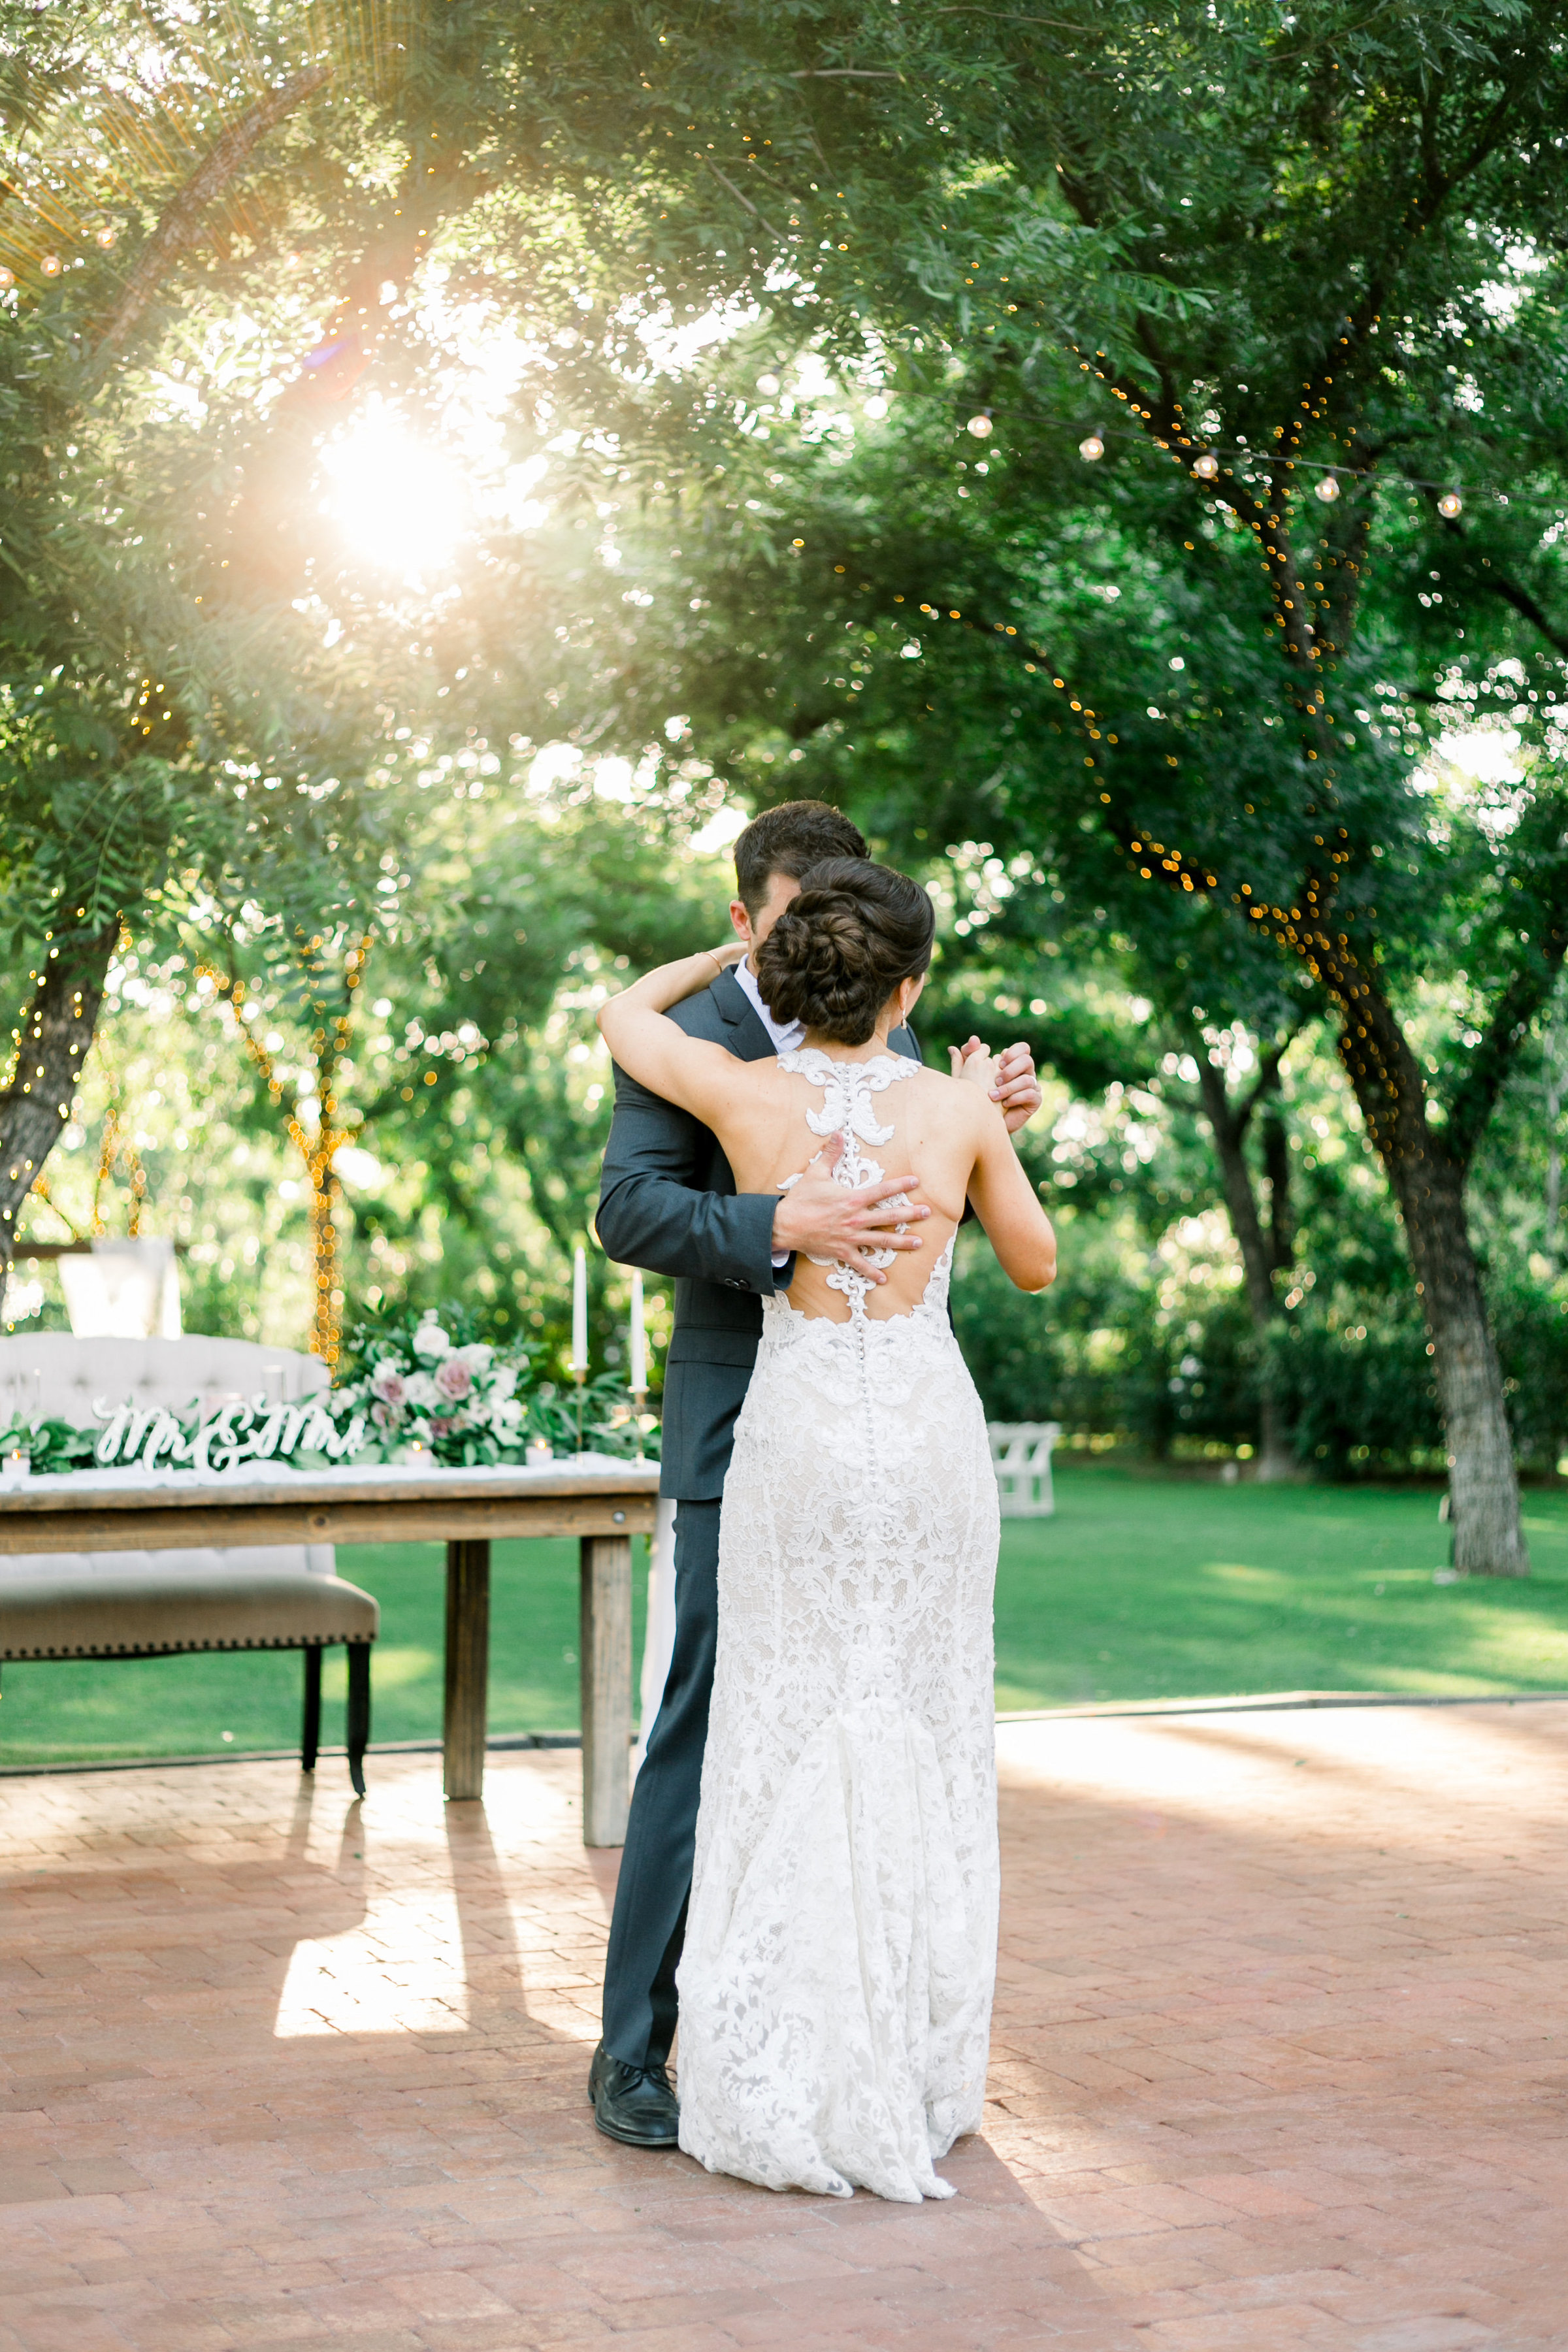 Karlie Colleen Photography - Venue At The Grove - Arizona Wedding - Maggie & Grant -99